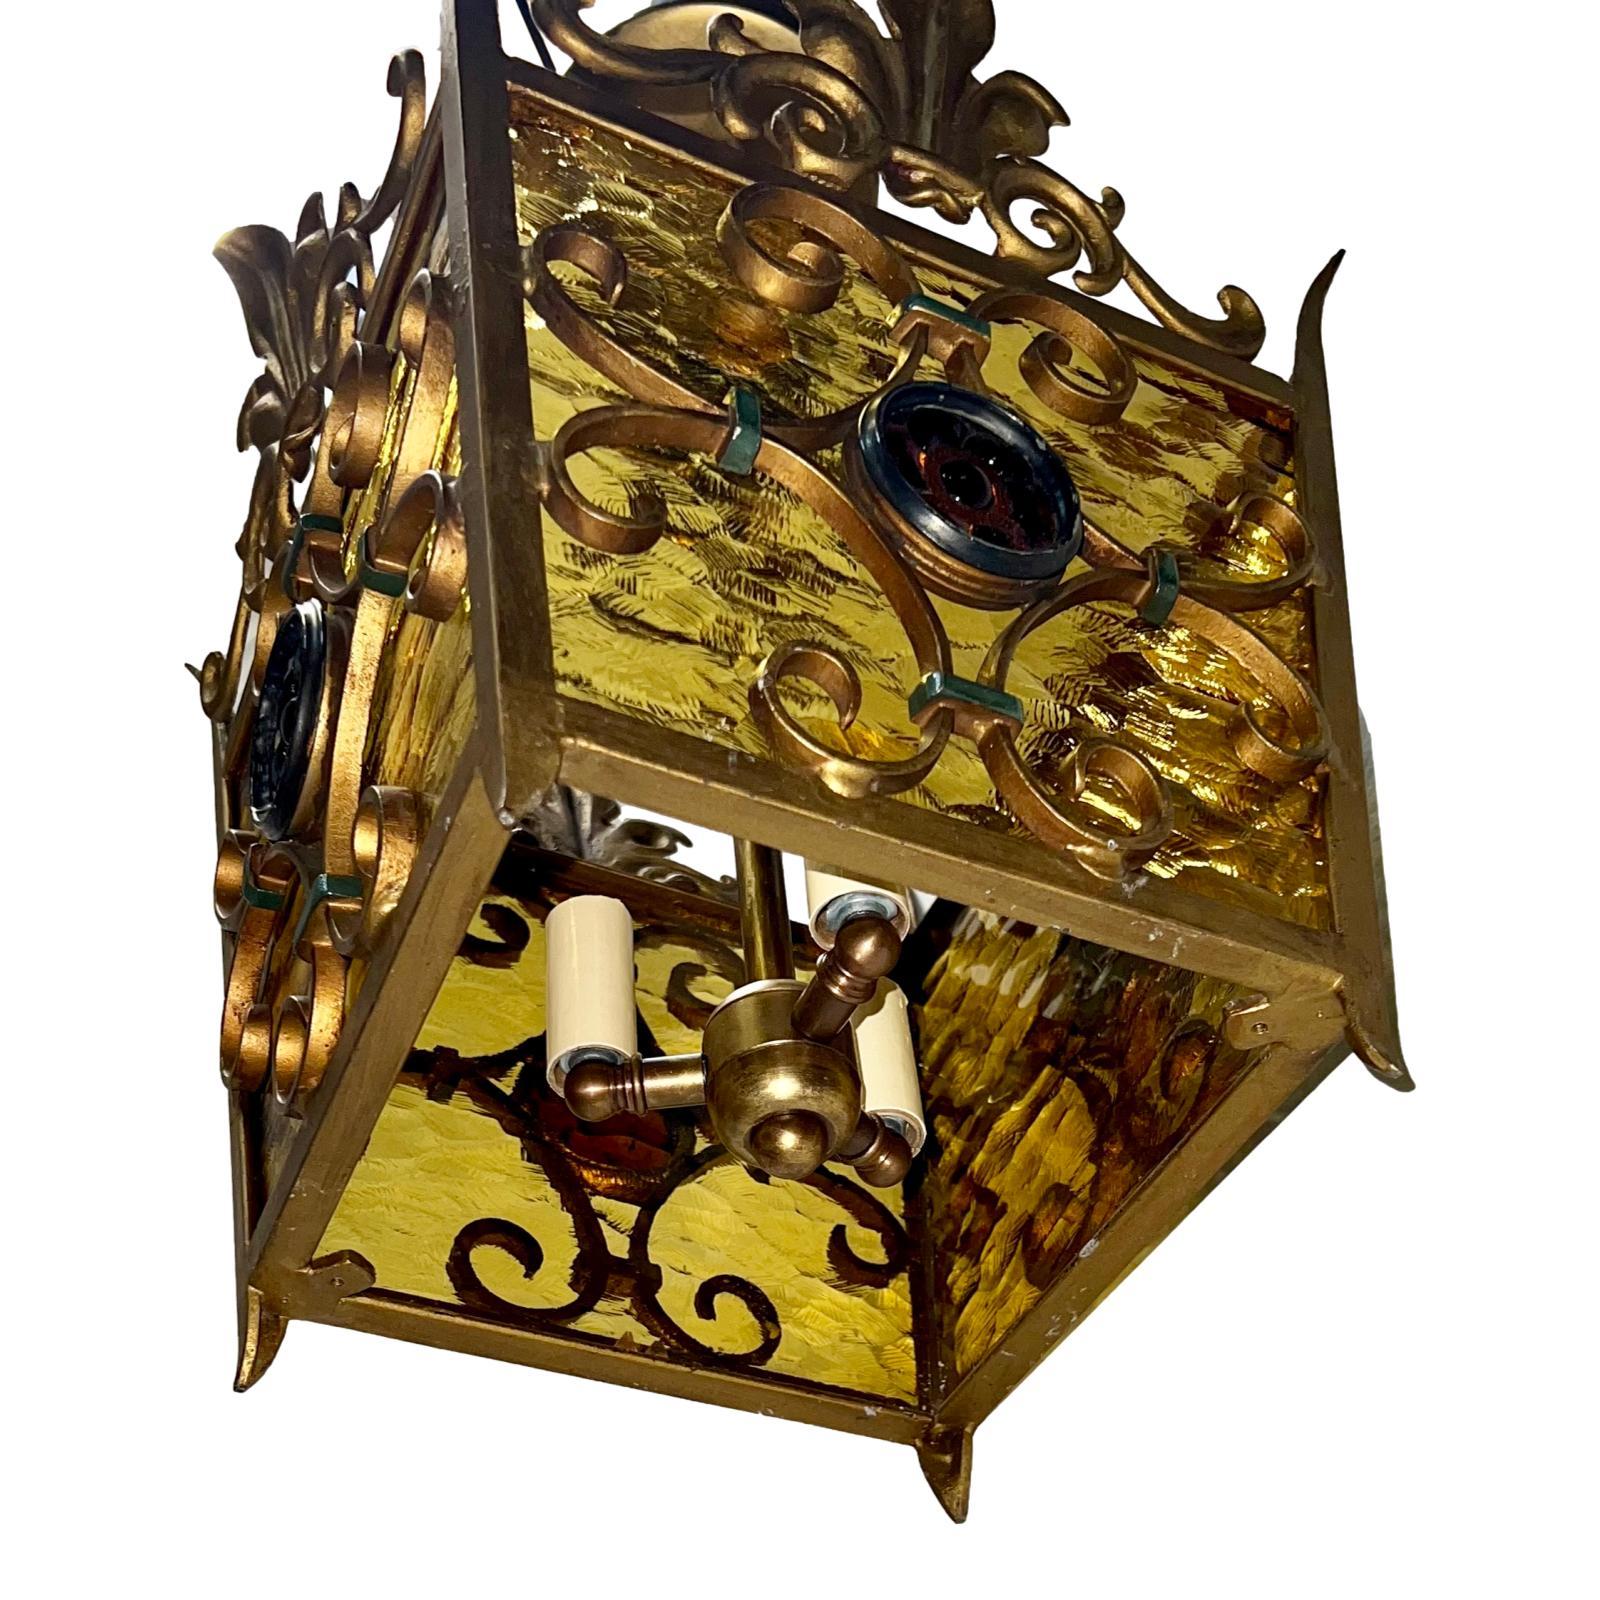 An Italian circa 1950’s gilt iron lantern with blown glass insets.

Measurements:
Drop: 19?
Length/width: 11? square.